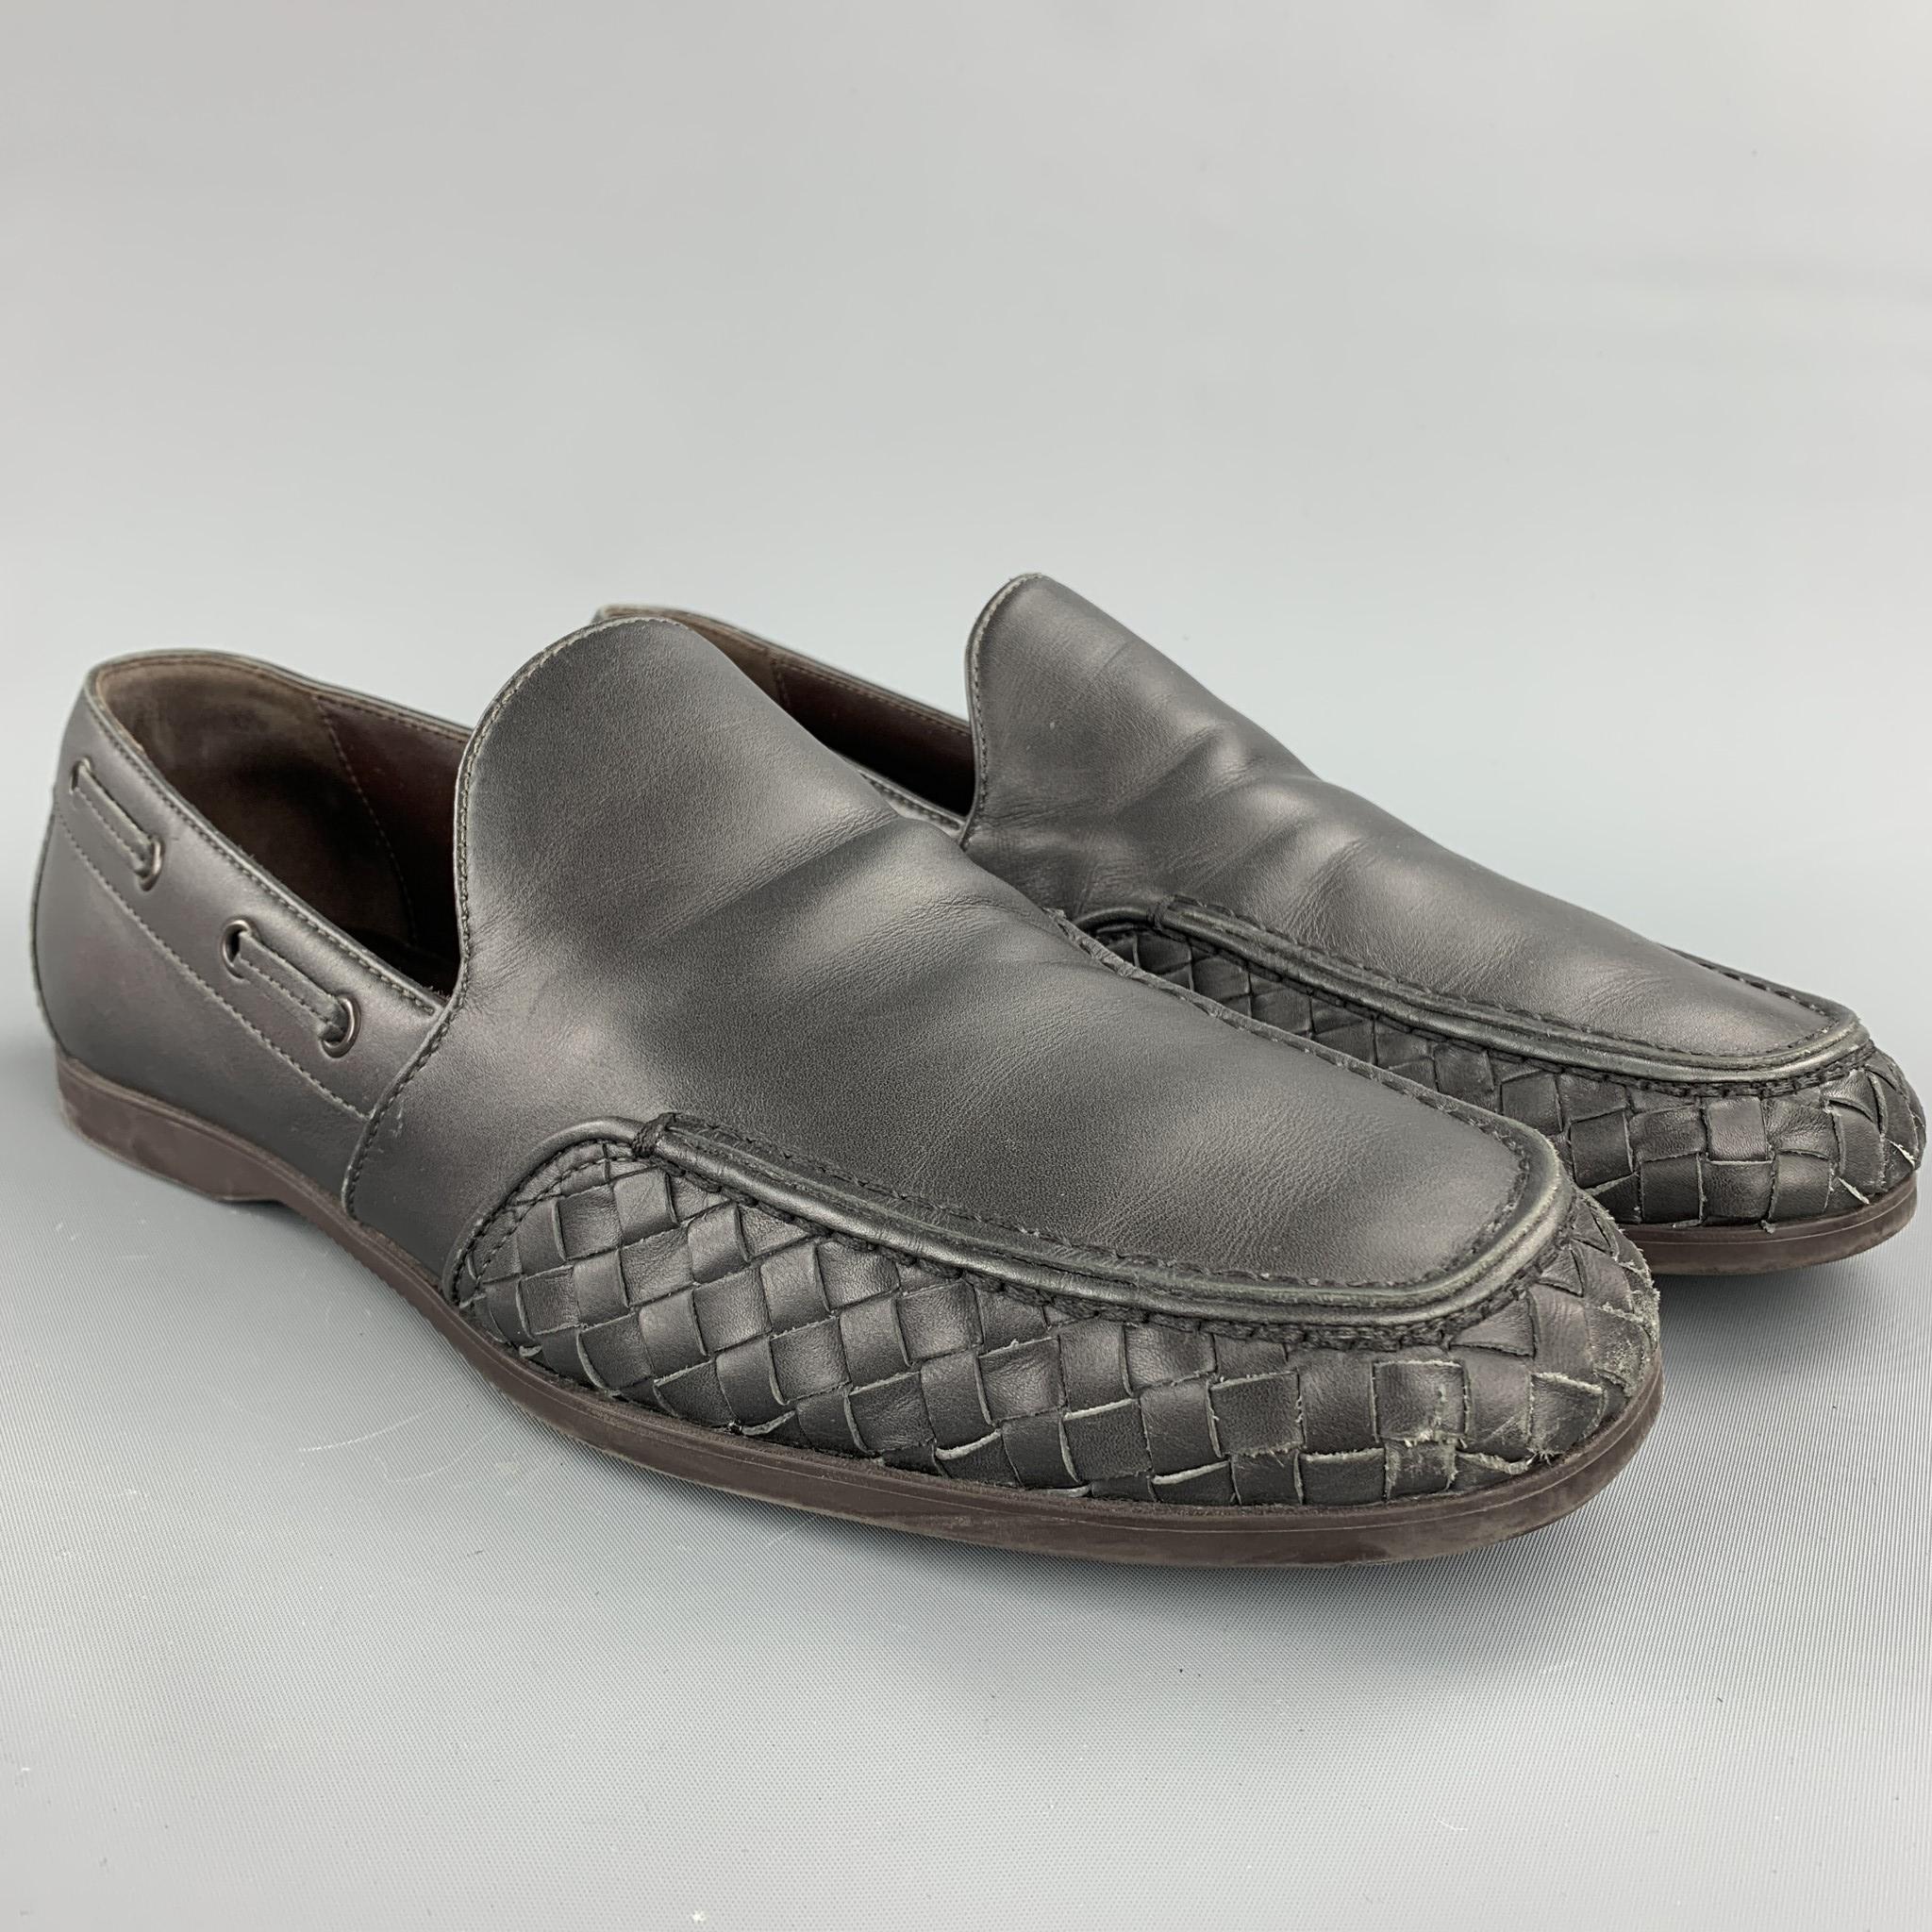 BOTTEGA VENETA loafers comes in a charcoal woven leather featuring a rubber sole. Made in Italy.

Excellent Pre-Owned Condition.
Marked: No size marked

Outsole:

12 in. x 4 in. 